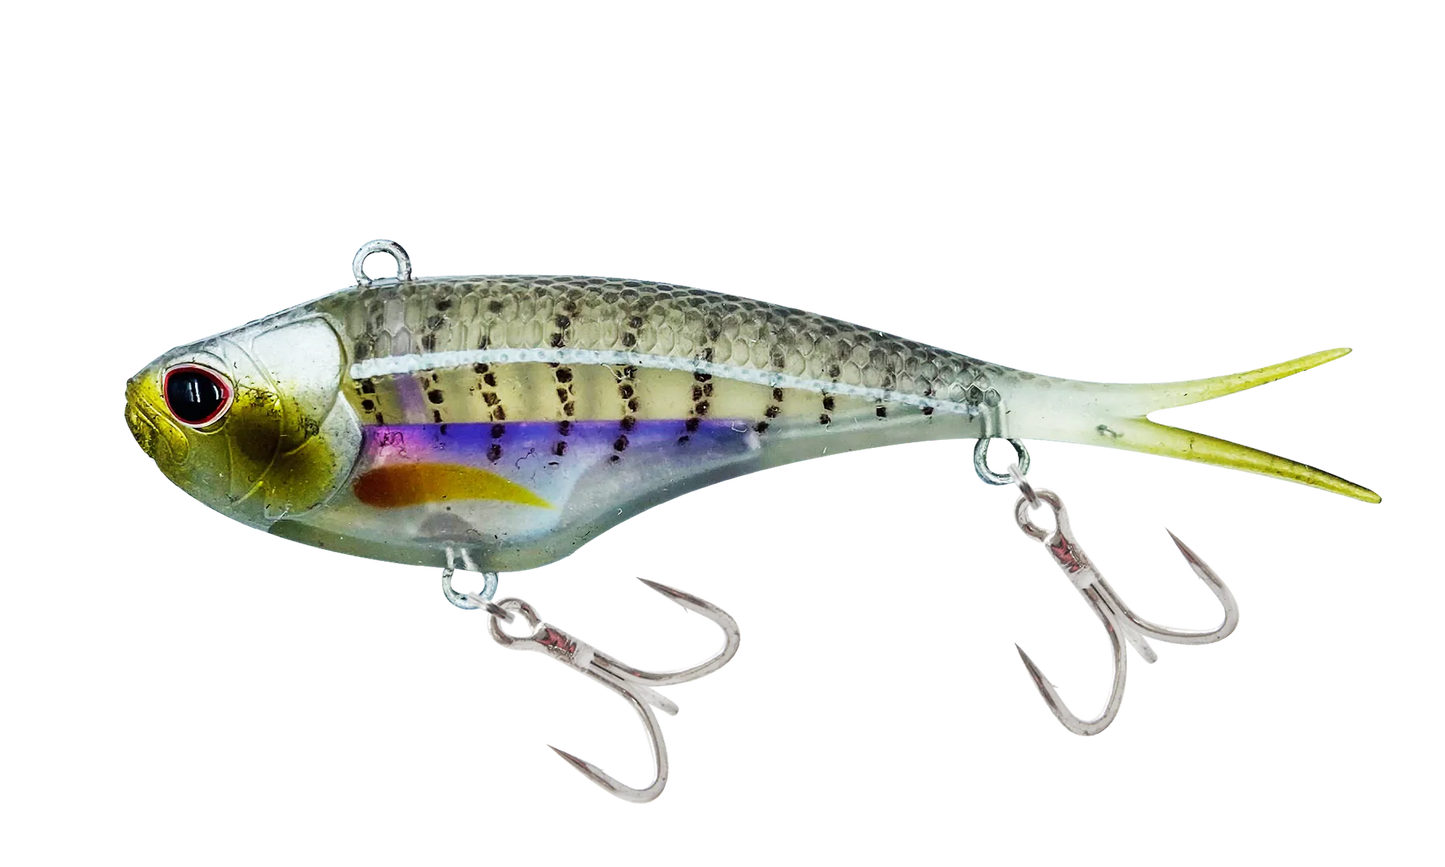 Nomad Design Vertrex Max Vibe 130 - Holo Ghost Shad